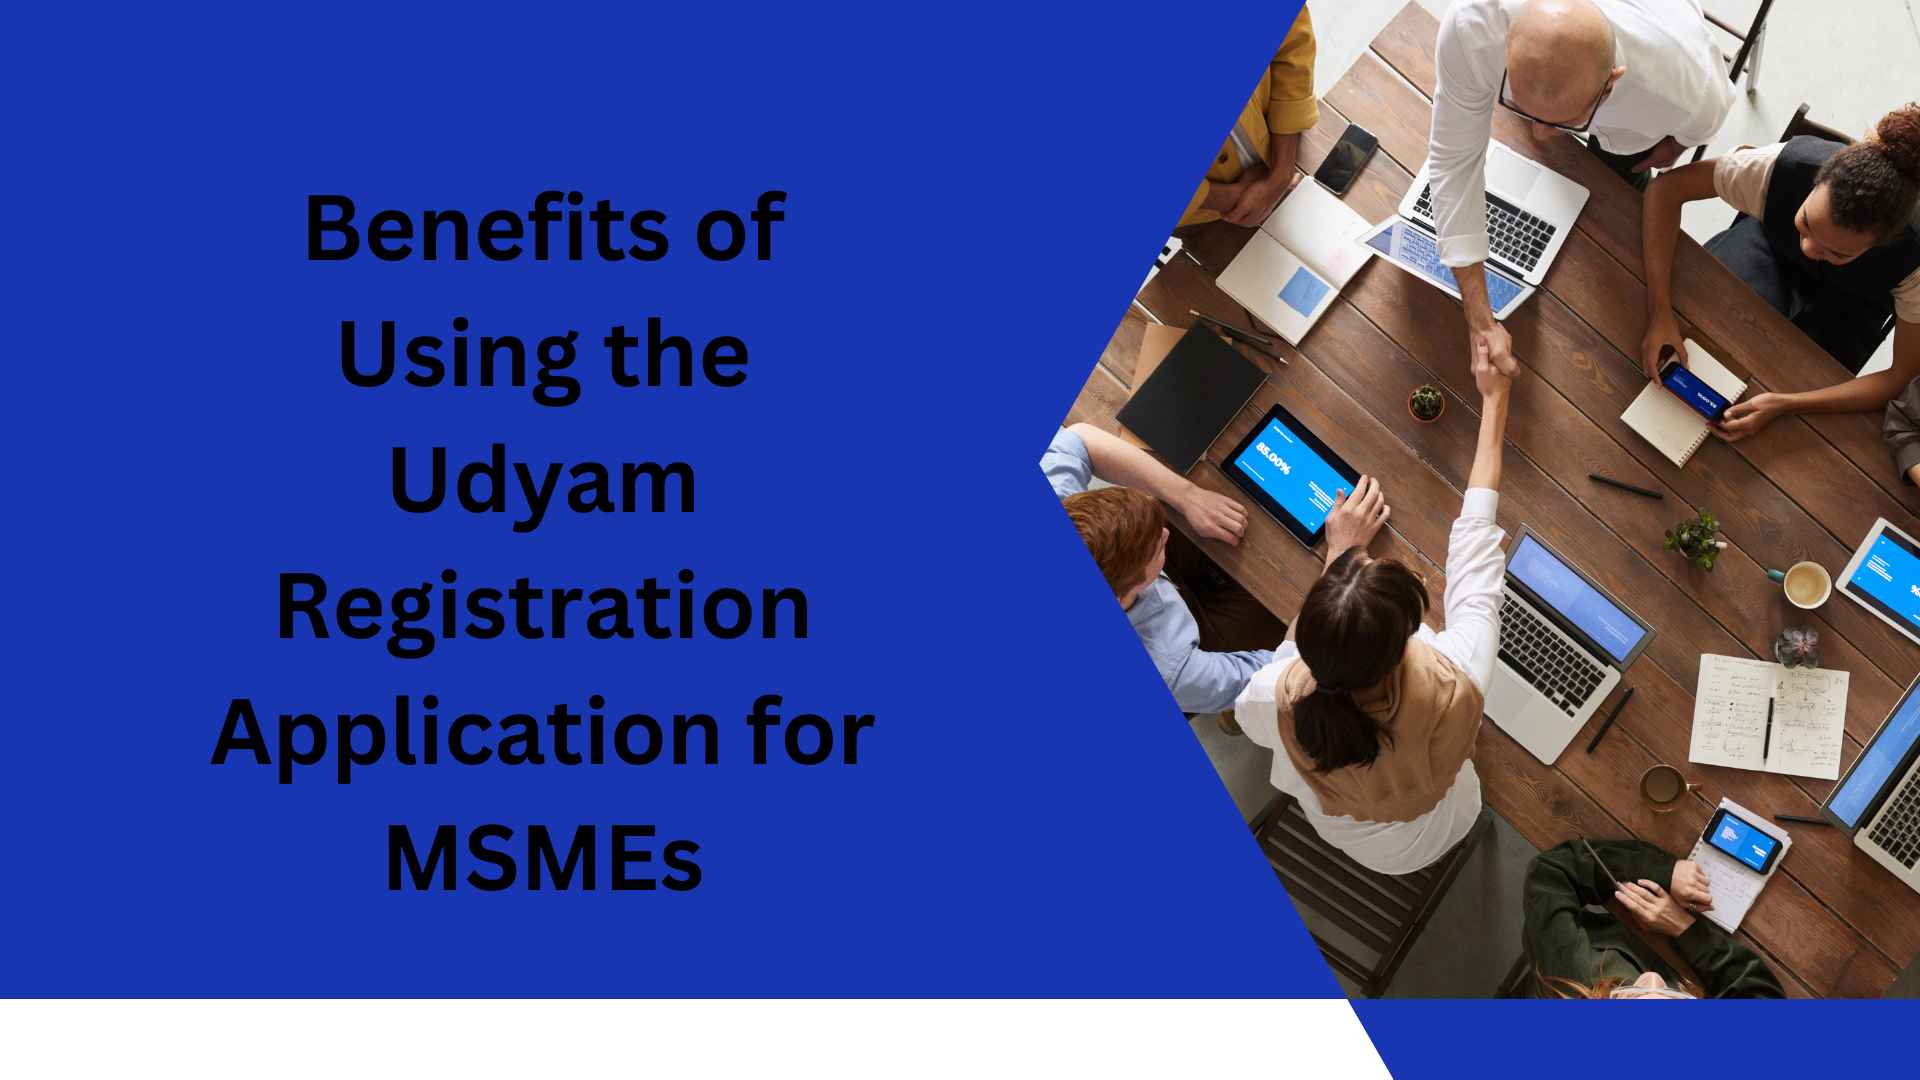 Benefits of Using the Udyam Registration Application for MSMEs